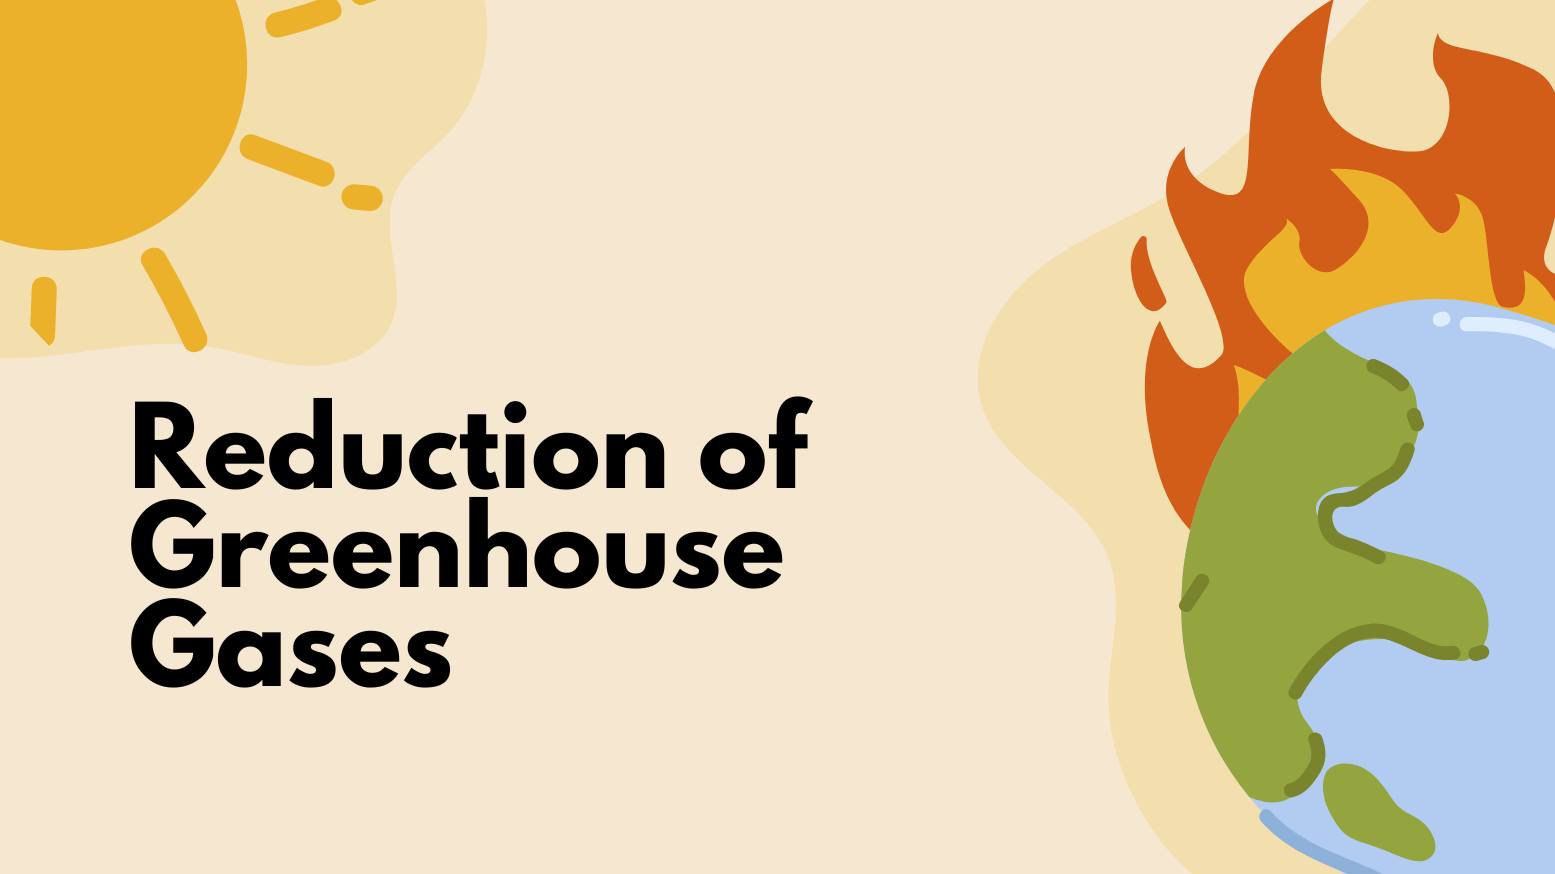 Reduction of greenhouse gasses